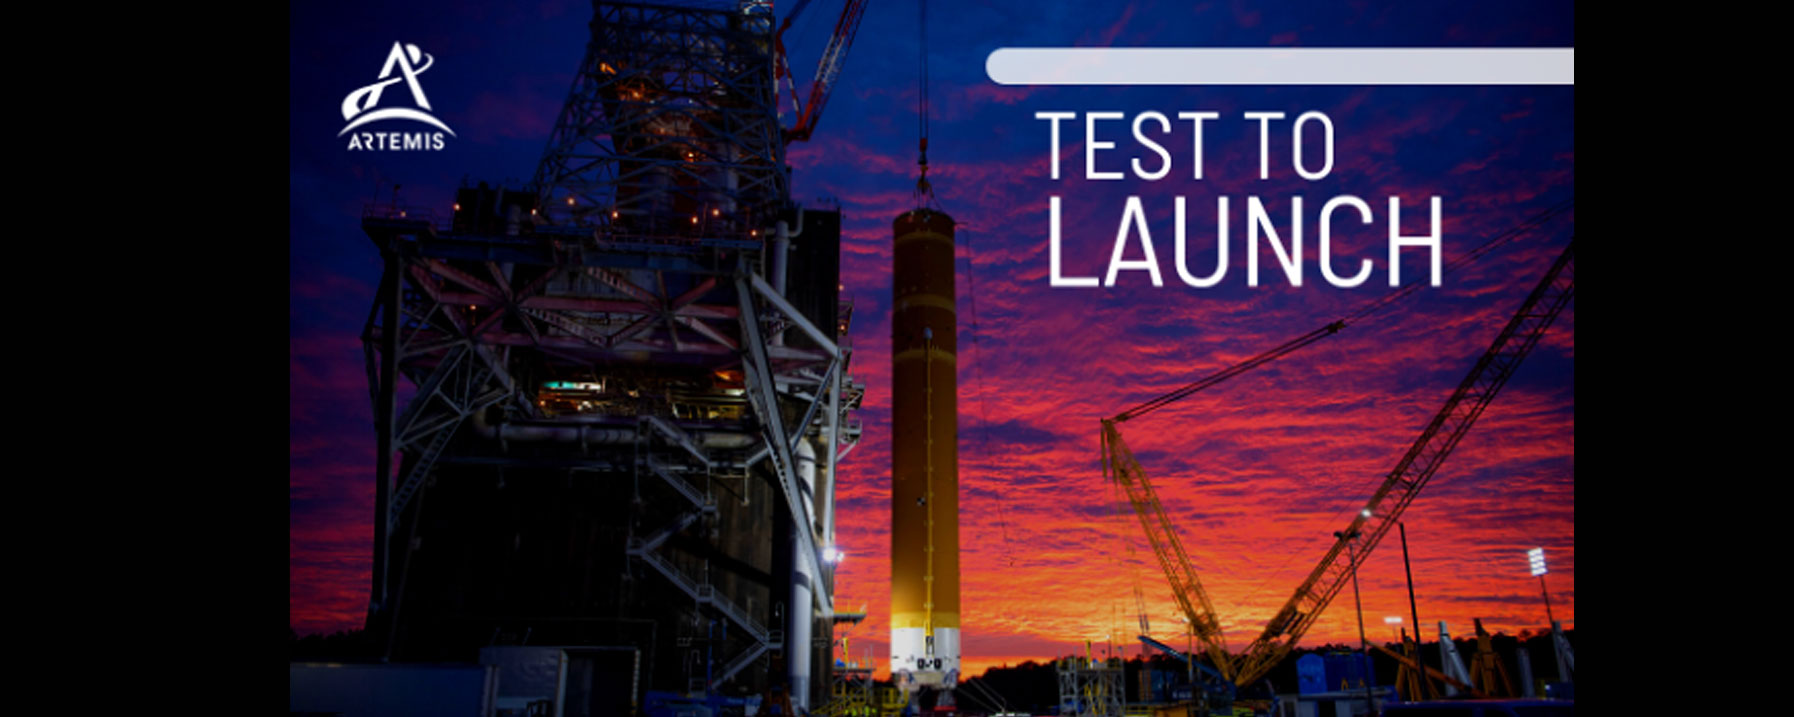 The SLS Rocket on the Test Stand at sunset